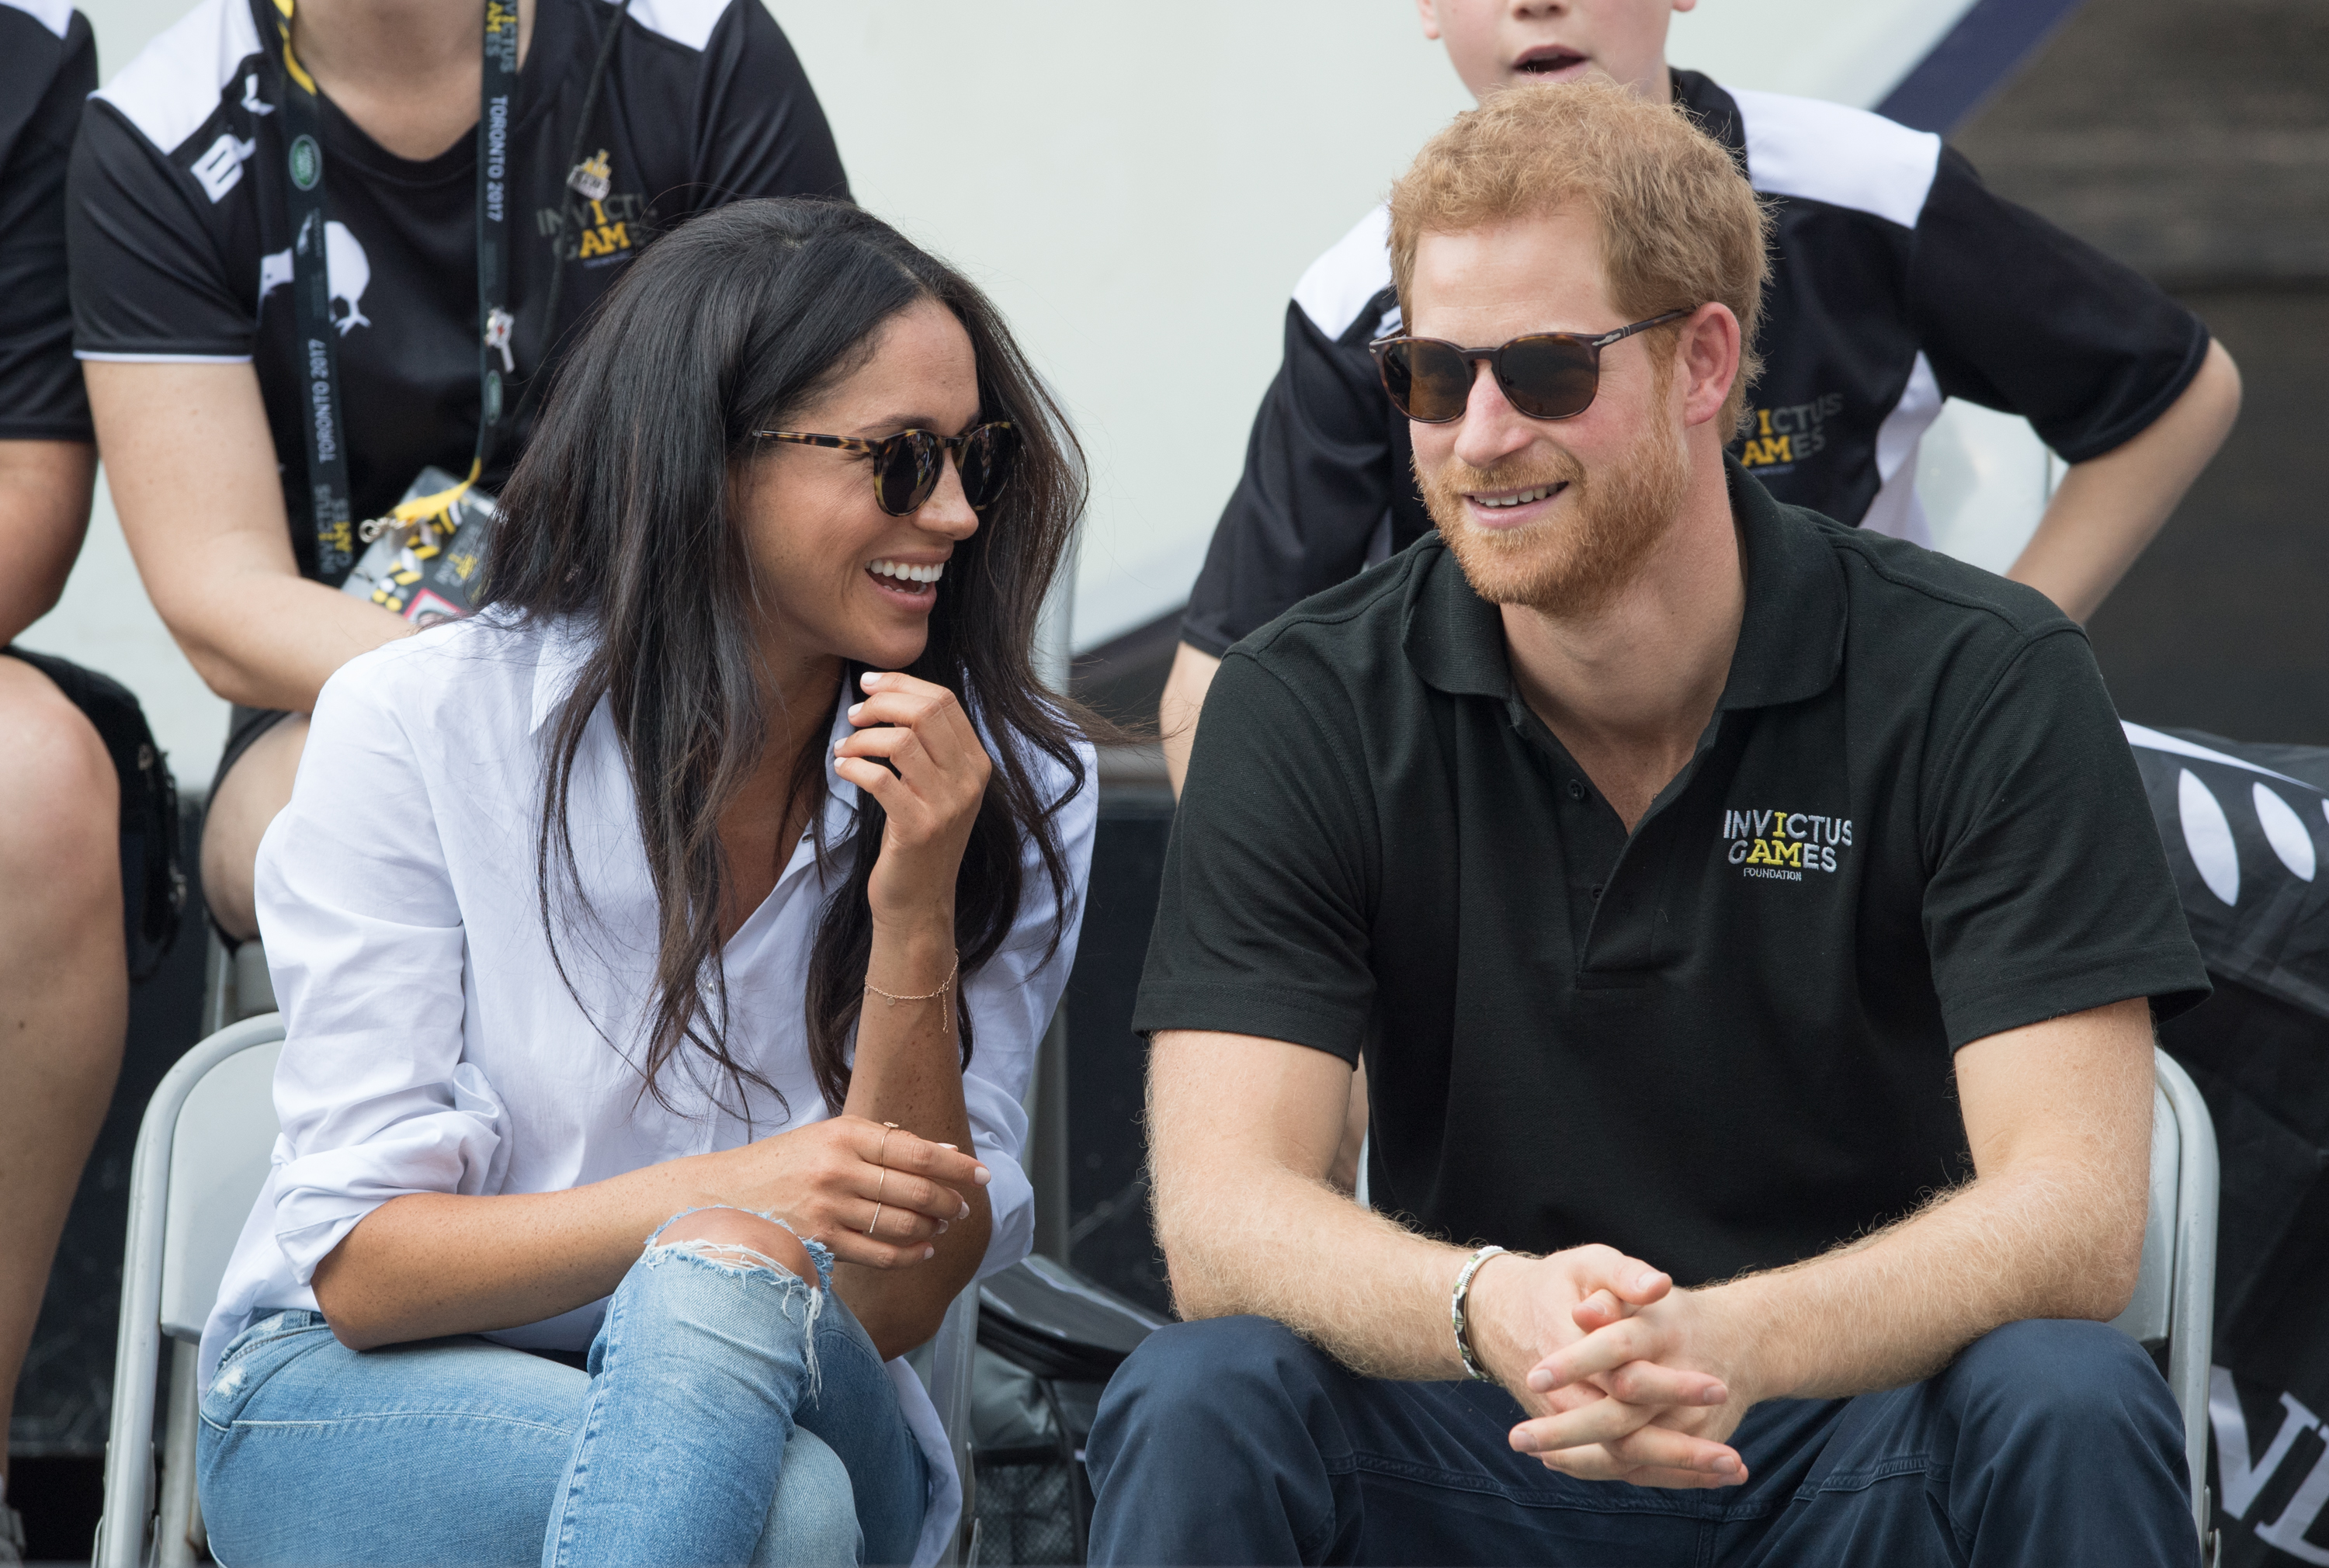 Meghan Markle and Prince Harry attend wheelchair tennis on day 3 of the Invictus Games Toronto in Toronto, Canada, on September 25, 2017. | Source: Getty Images